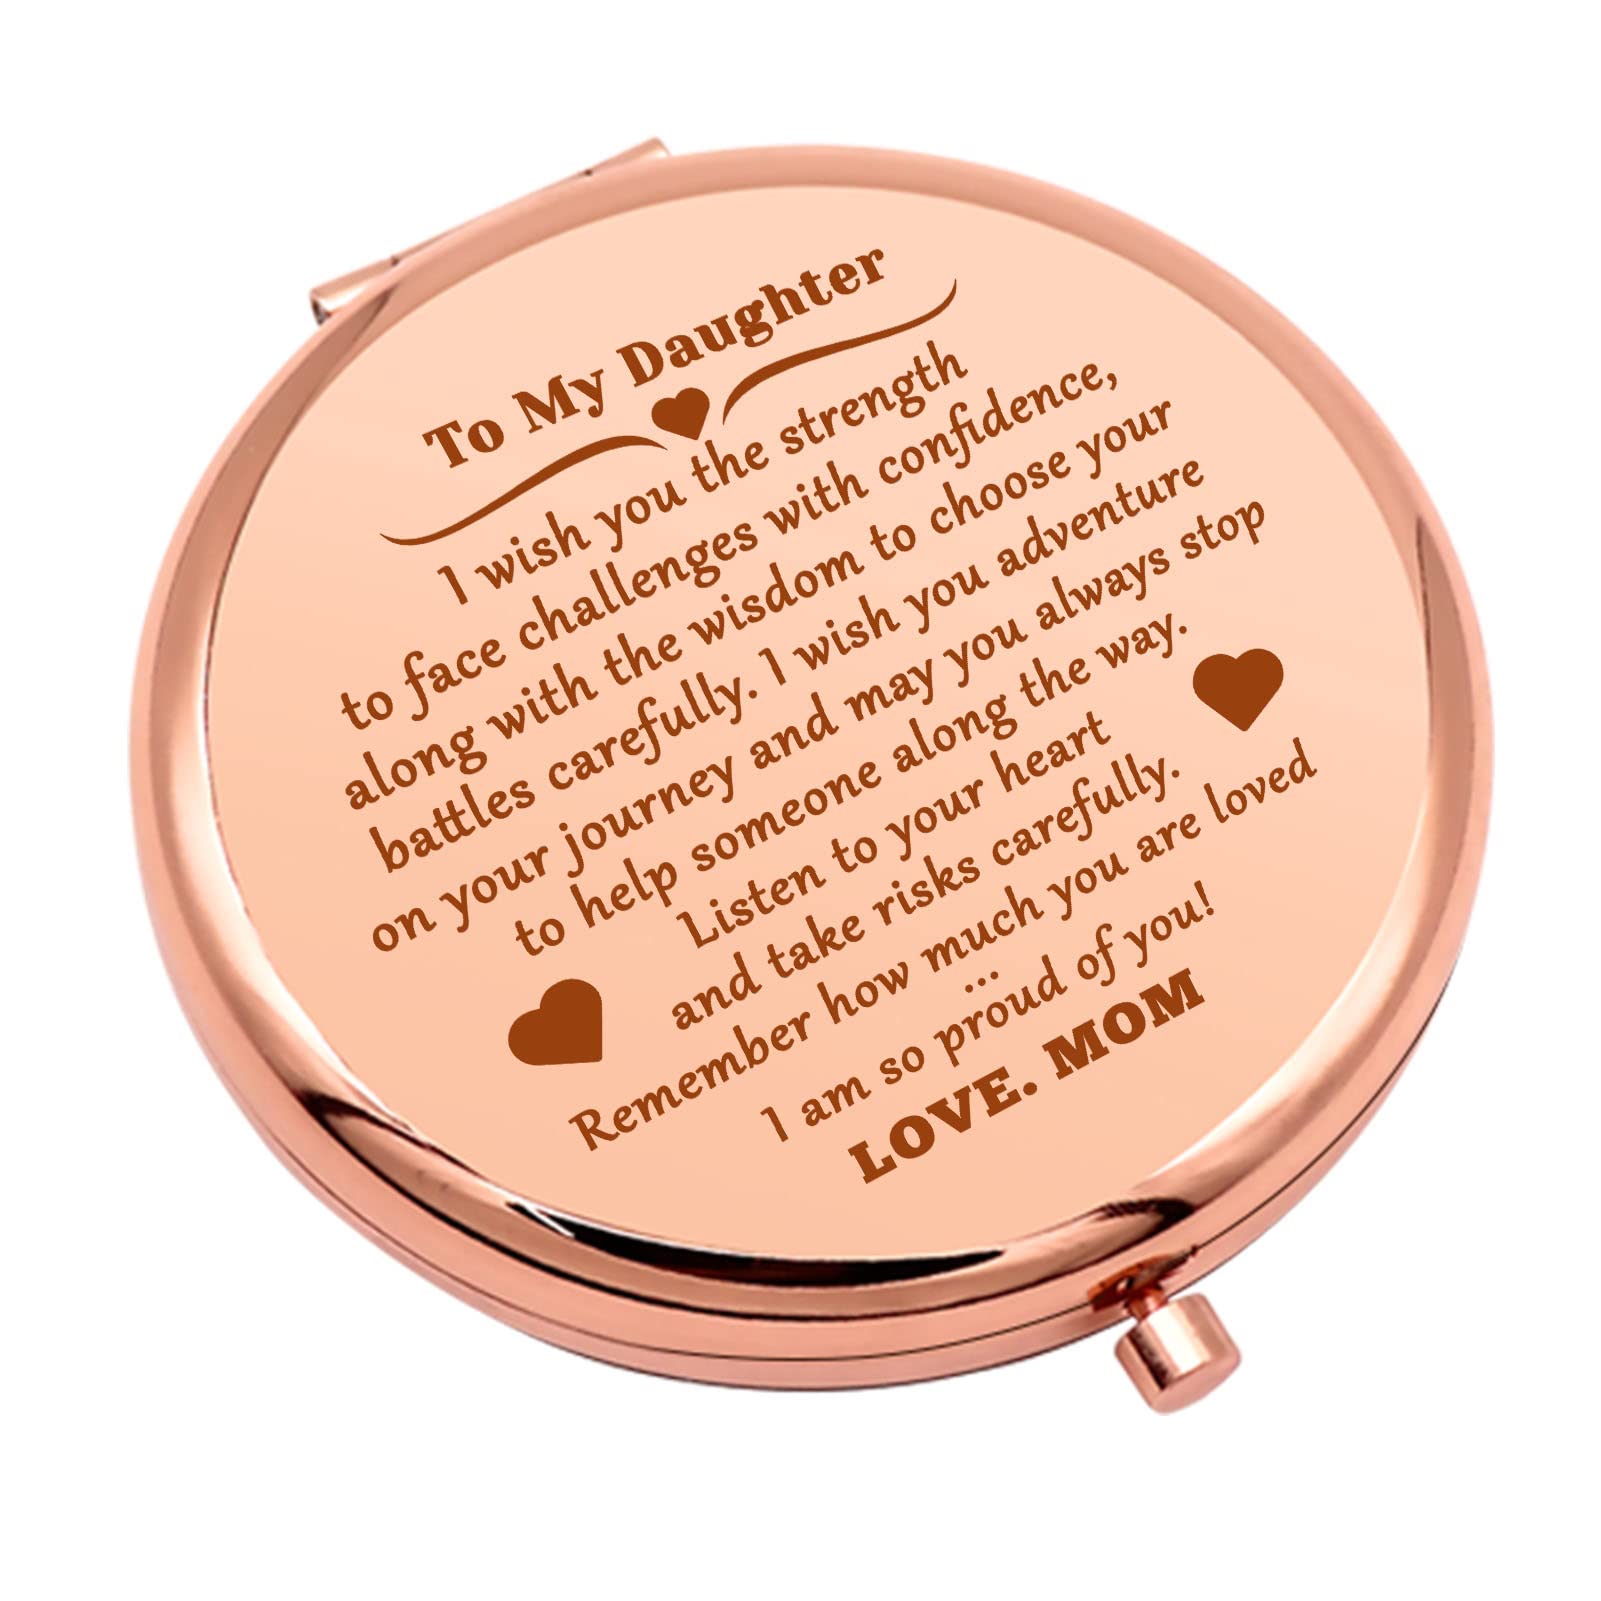 Mermaid Gifts for Girls Inspirational Gifts Compact Makeup Mirror for  Sister Daughter Niece Mermaid Lover Gifts for Women Encouragement Gifts  Folding Makeup Mirror Birthday Christmas Graduation Gifts